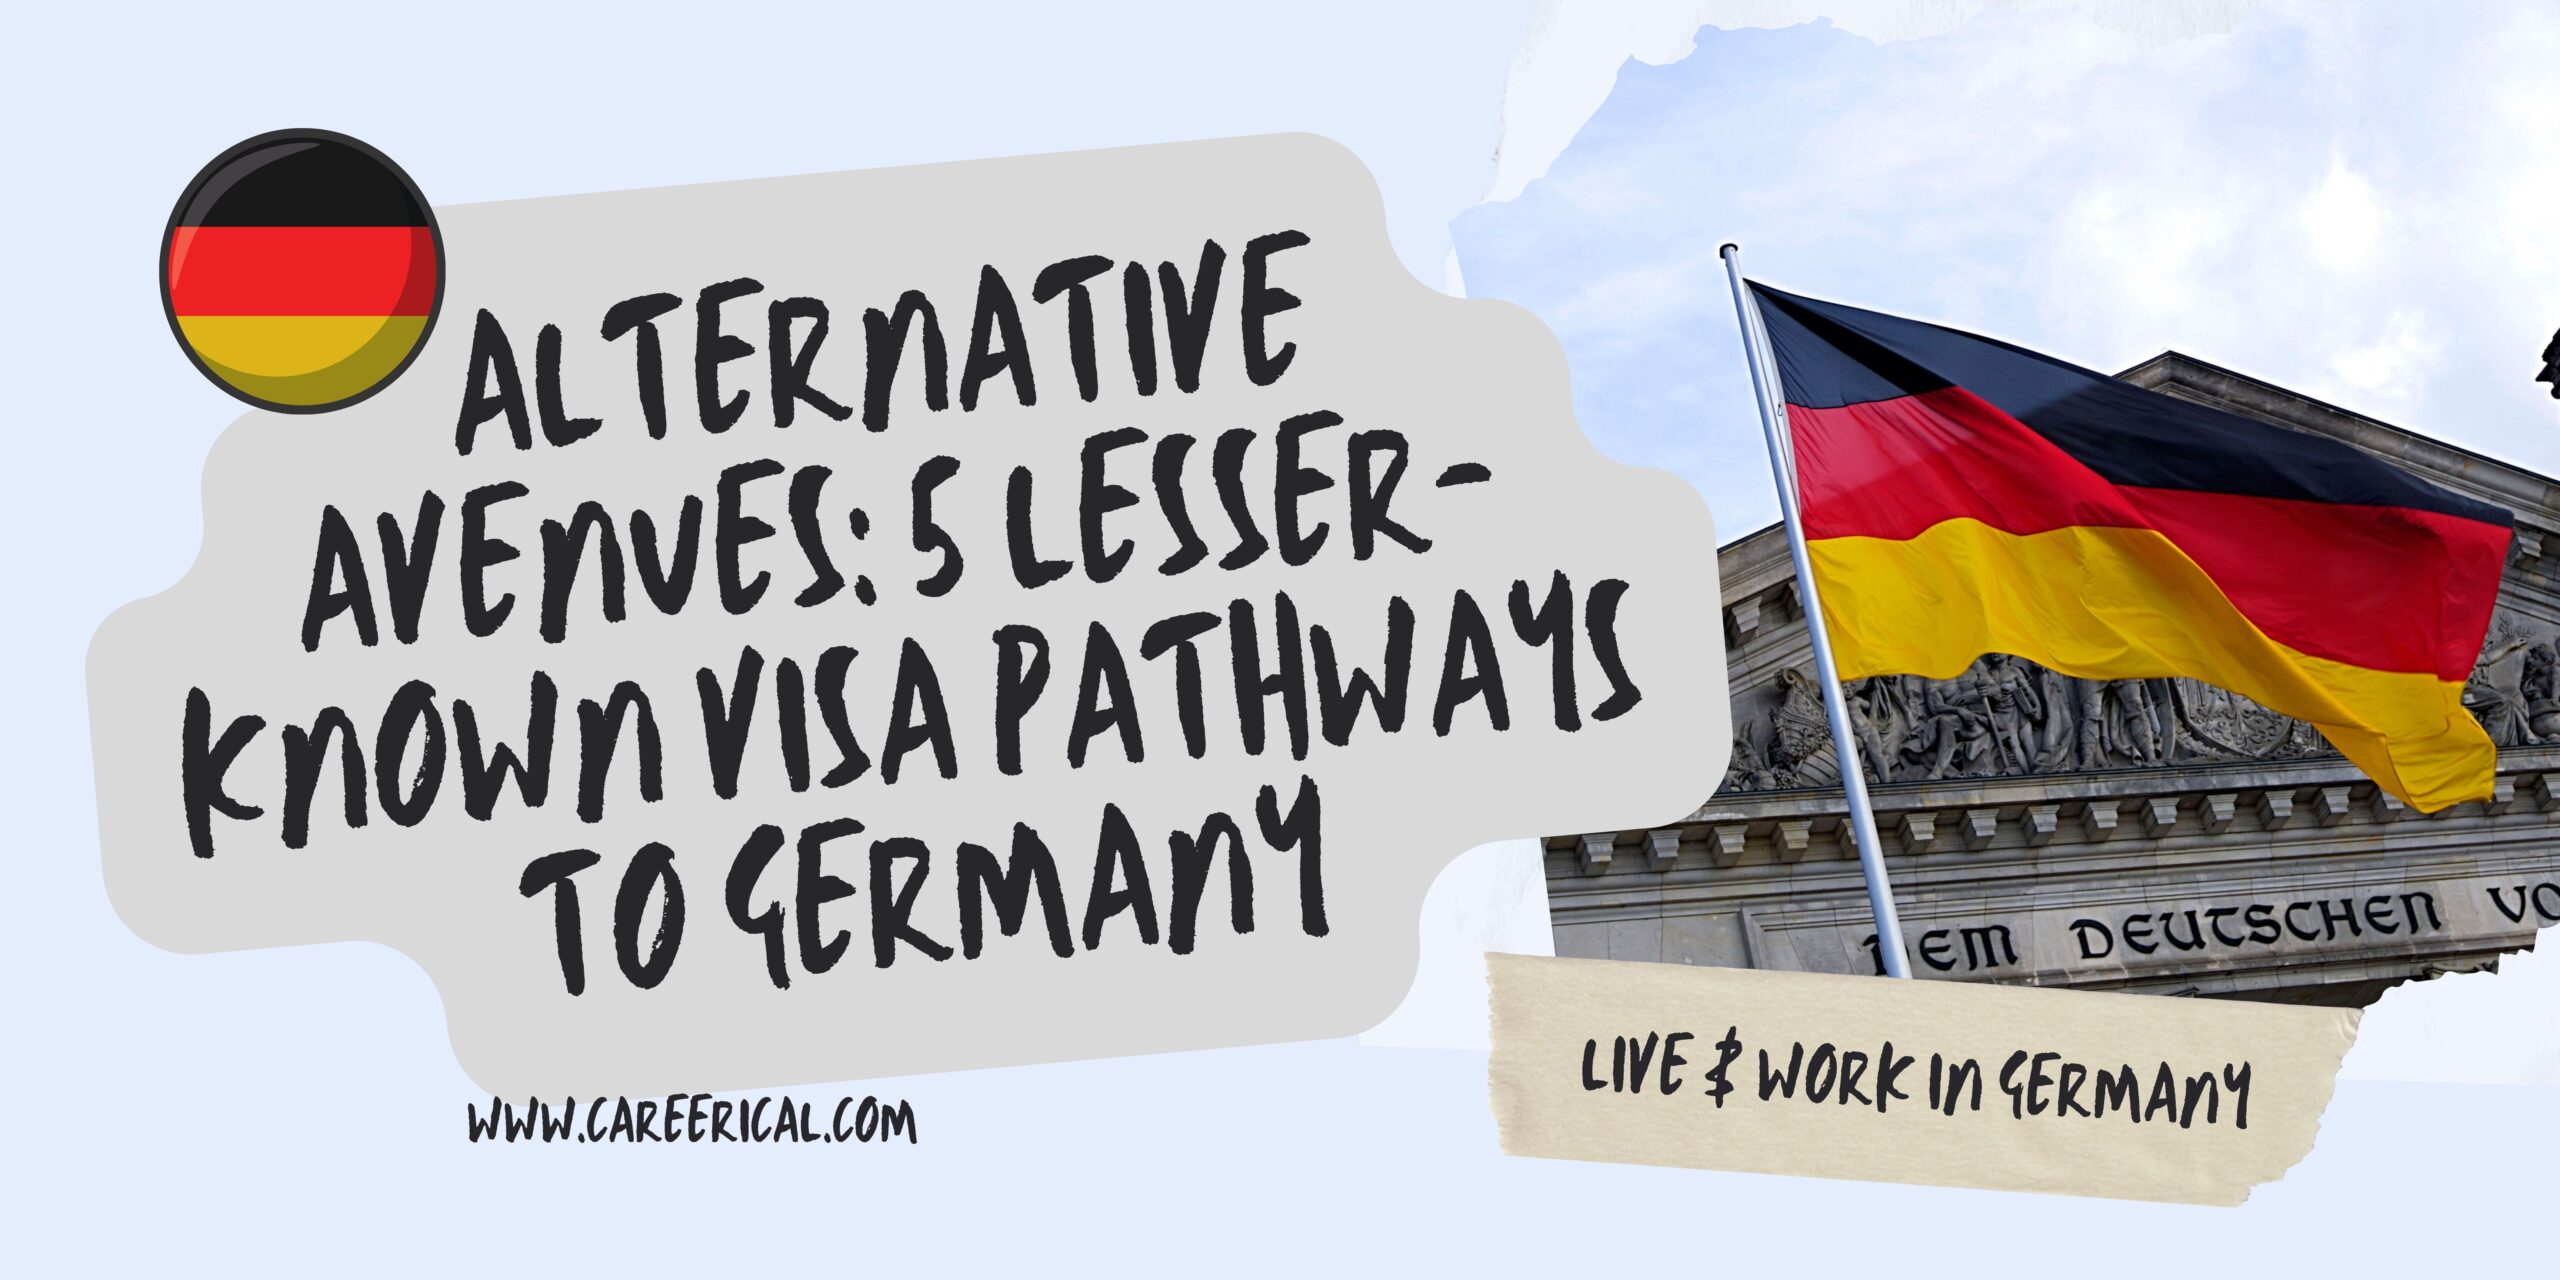 Alternative Avenues 5 Lesser-Known Visa Pathways to Germany